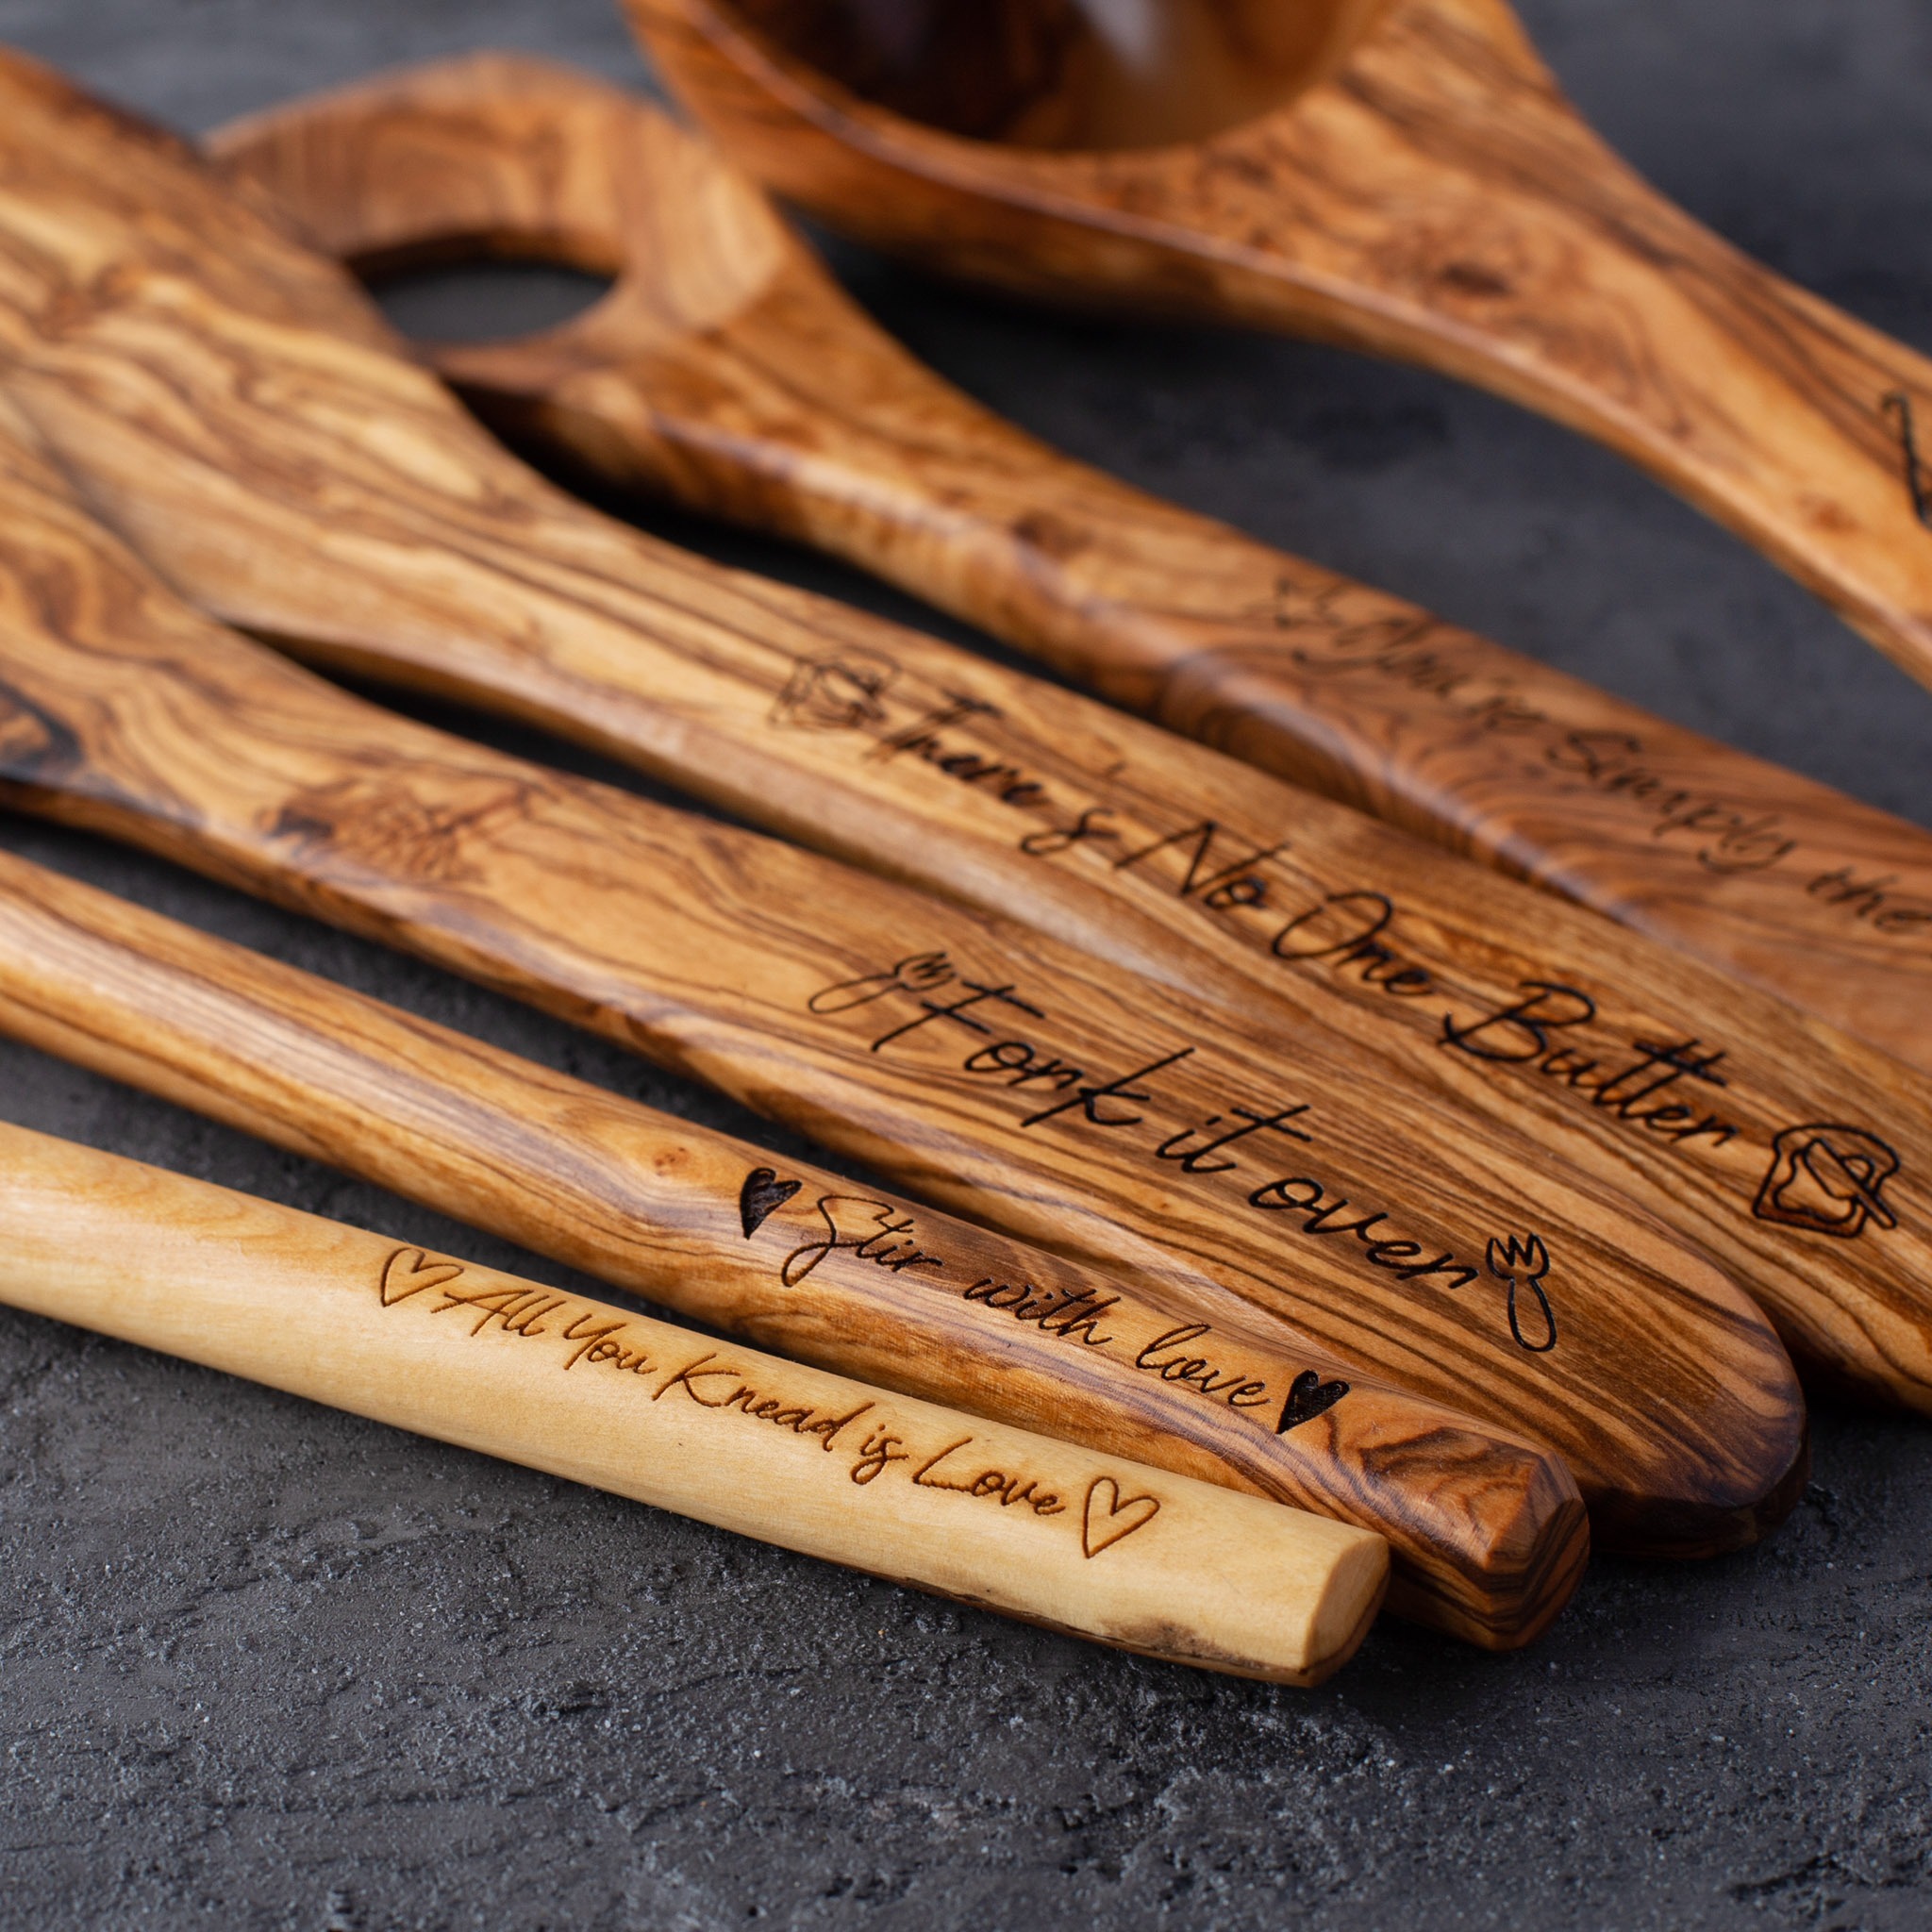 Personalized Wooden Kitchen Utensils (Set of 4) - Forest Decor